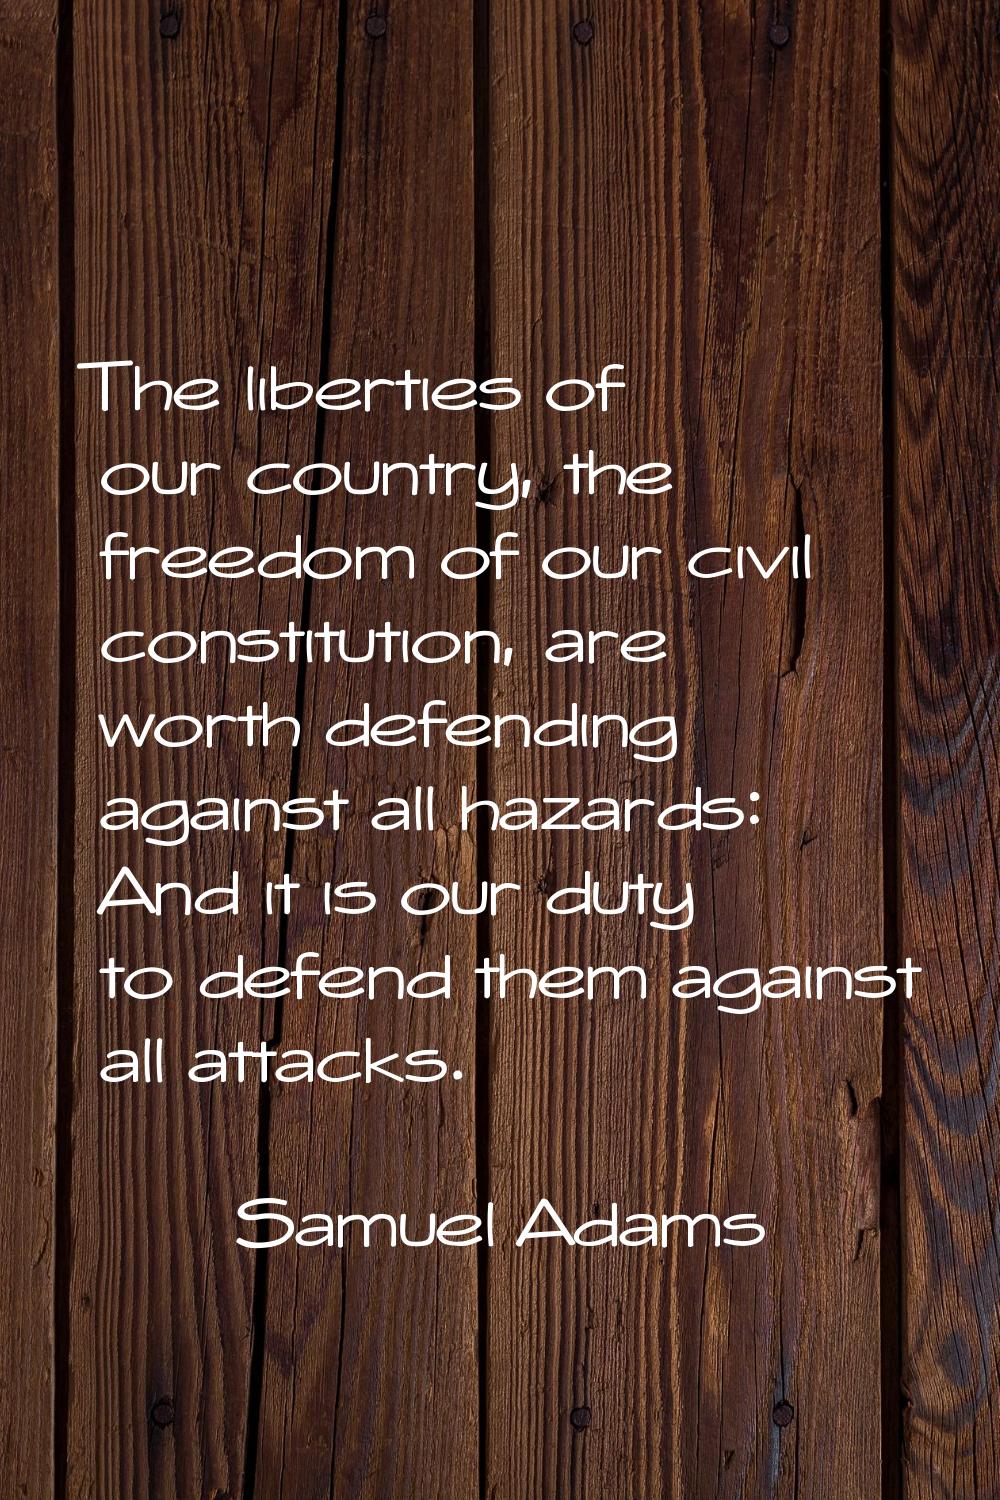 The liberties of our country, the freedom of our civil constitution, are worth defending against al